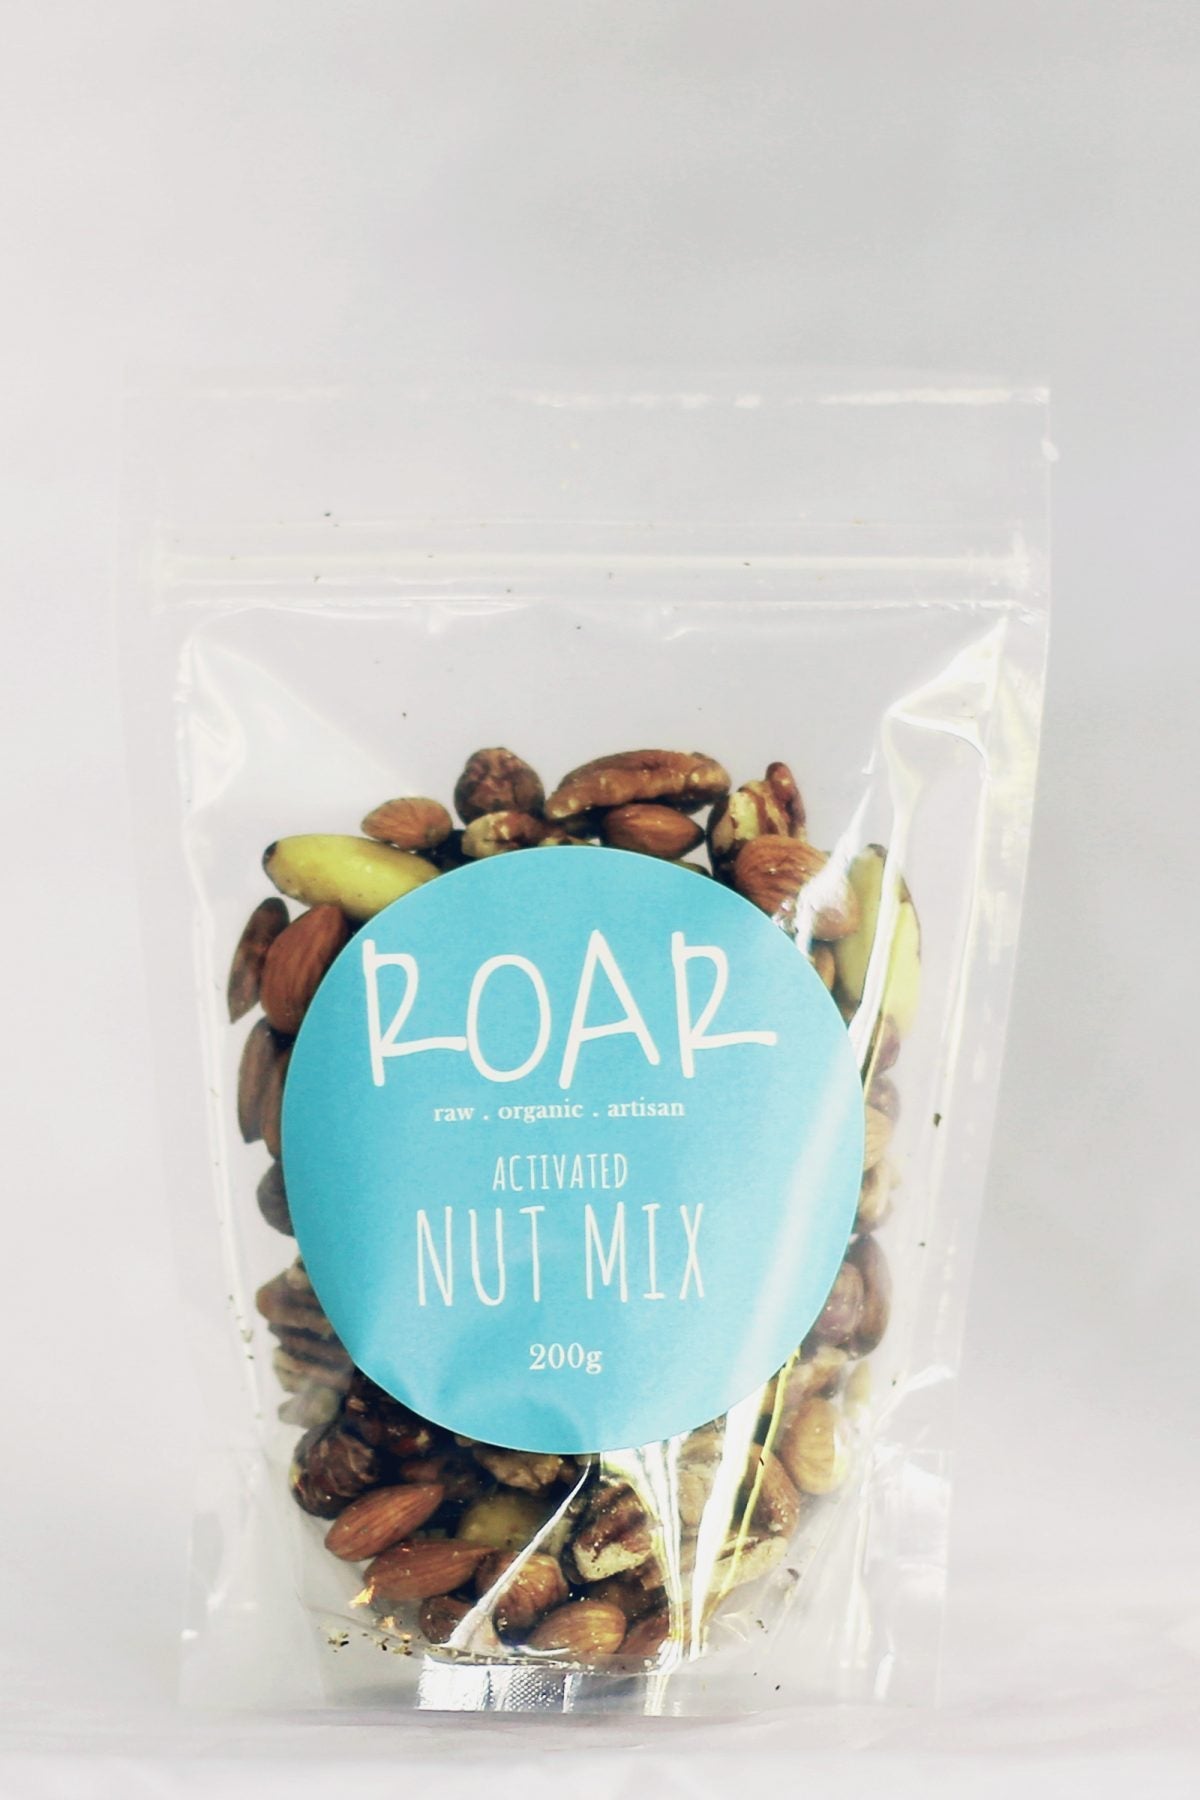 Roar Activated Nut Mix [200g]